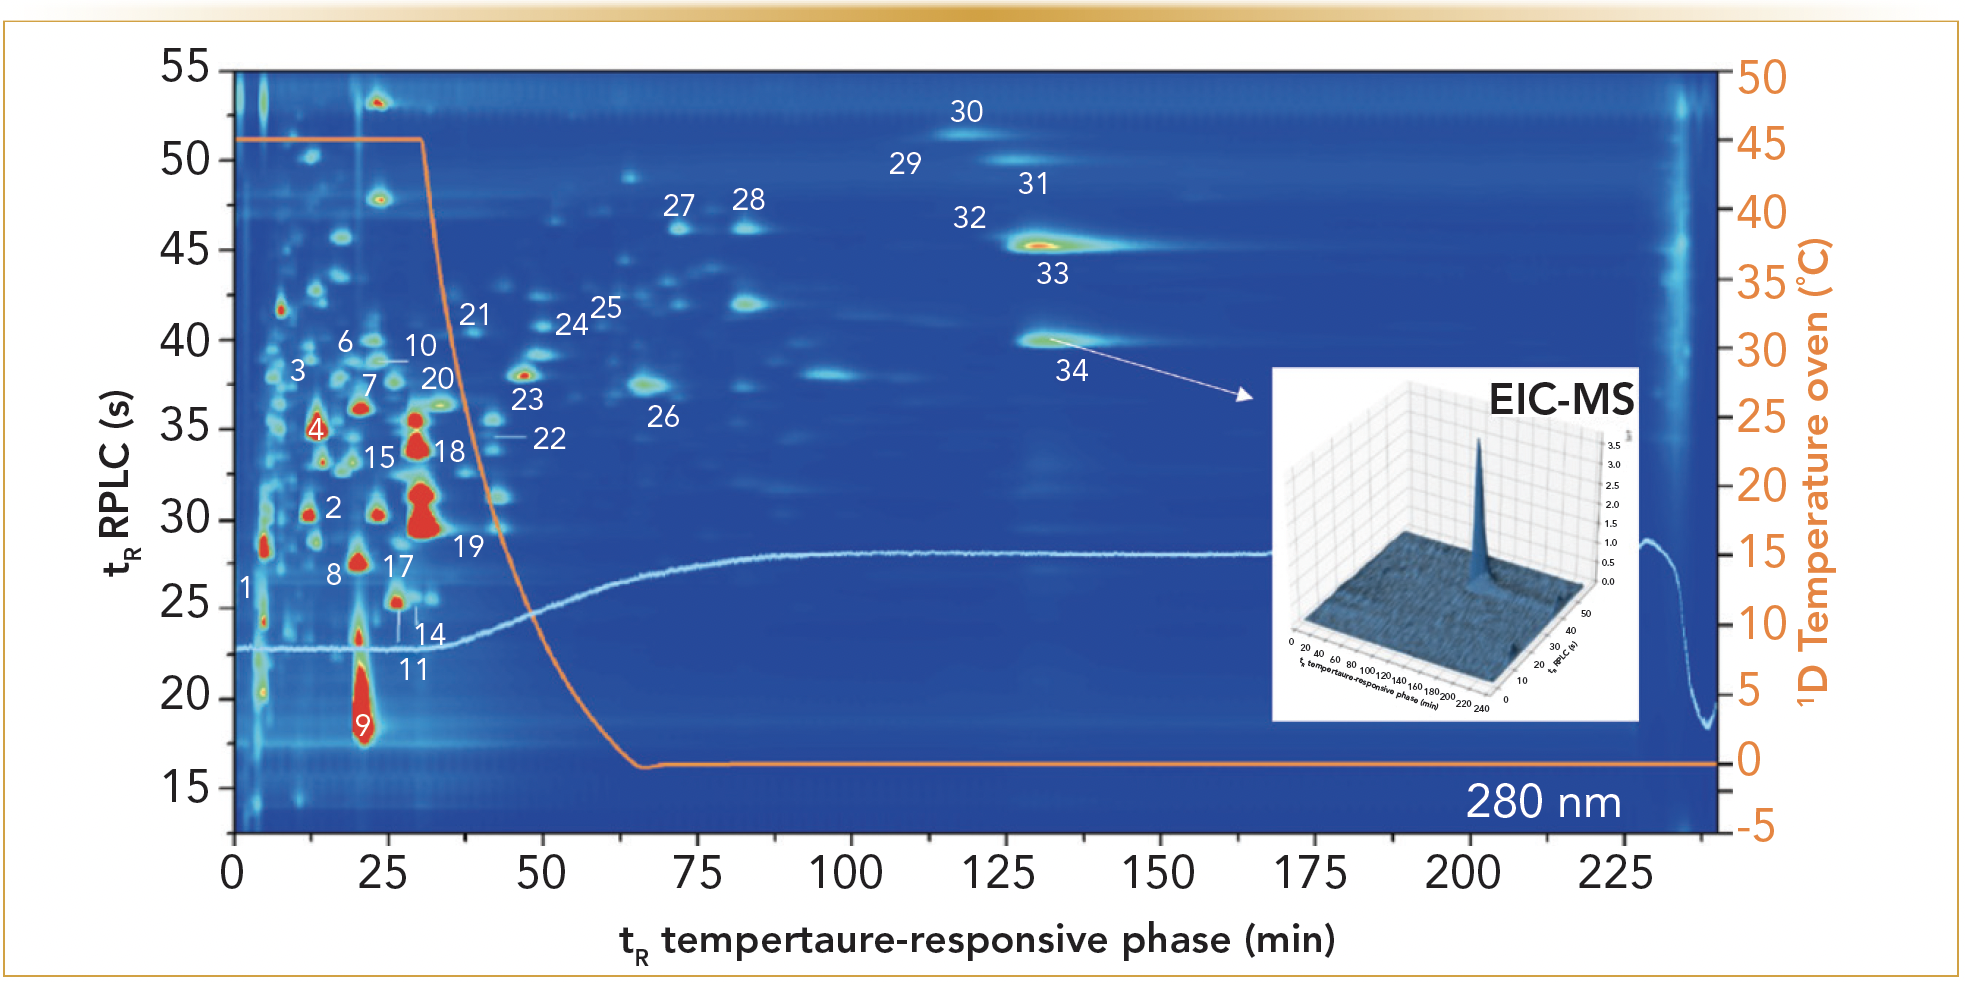 FIGURE 3: TRLC × RPLC-UV/MS separation of the phenolic fraction of a young South African red wine at 280 nm. The first dimension was performed using a reversed temperature gradient from 45 to 0 °C at 30 min, indicated by the orange signal. The peak numbers correspond to a number identified phenolics (9). Insert: ion trap-MS based extracted ion chromatogram of myrecitin (9).